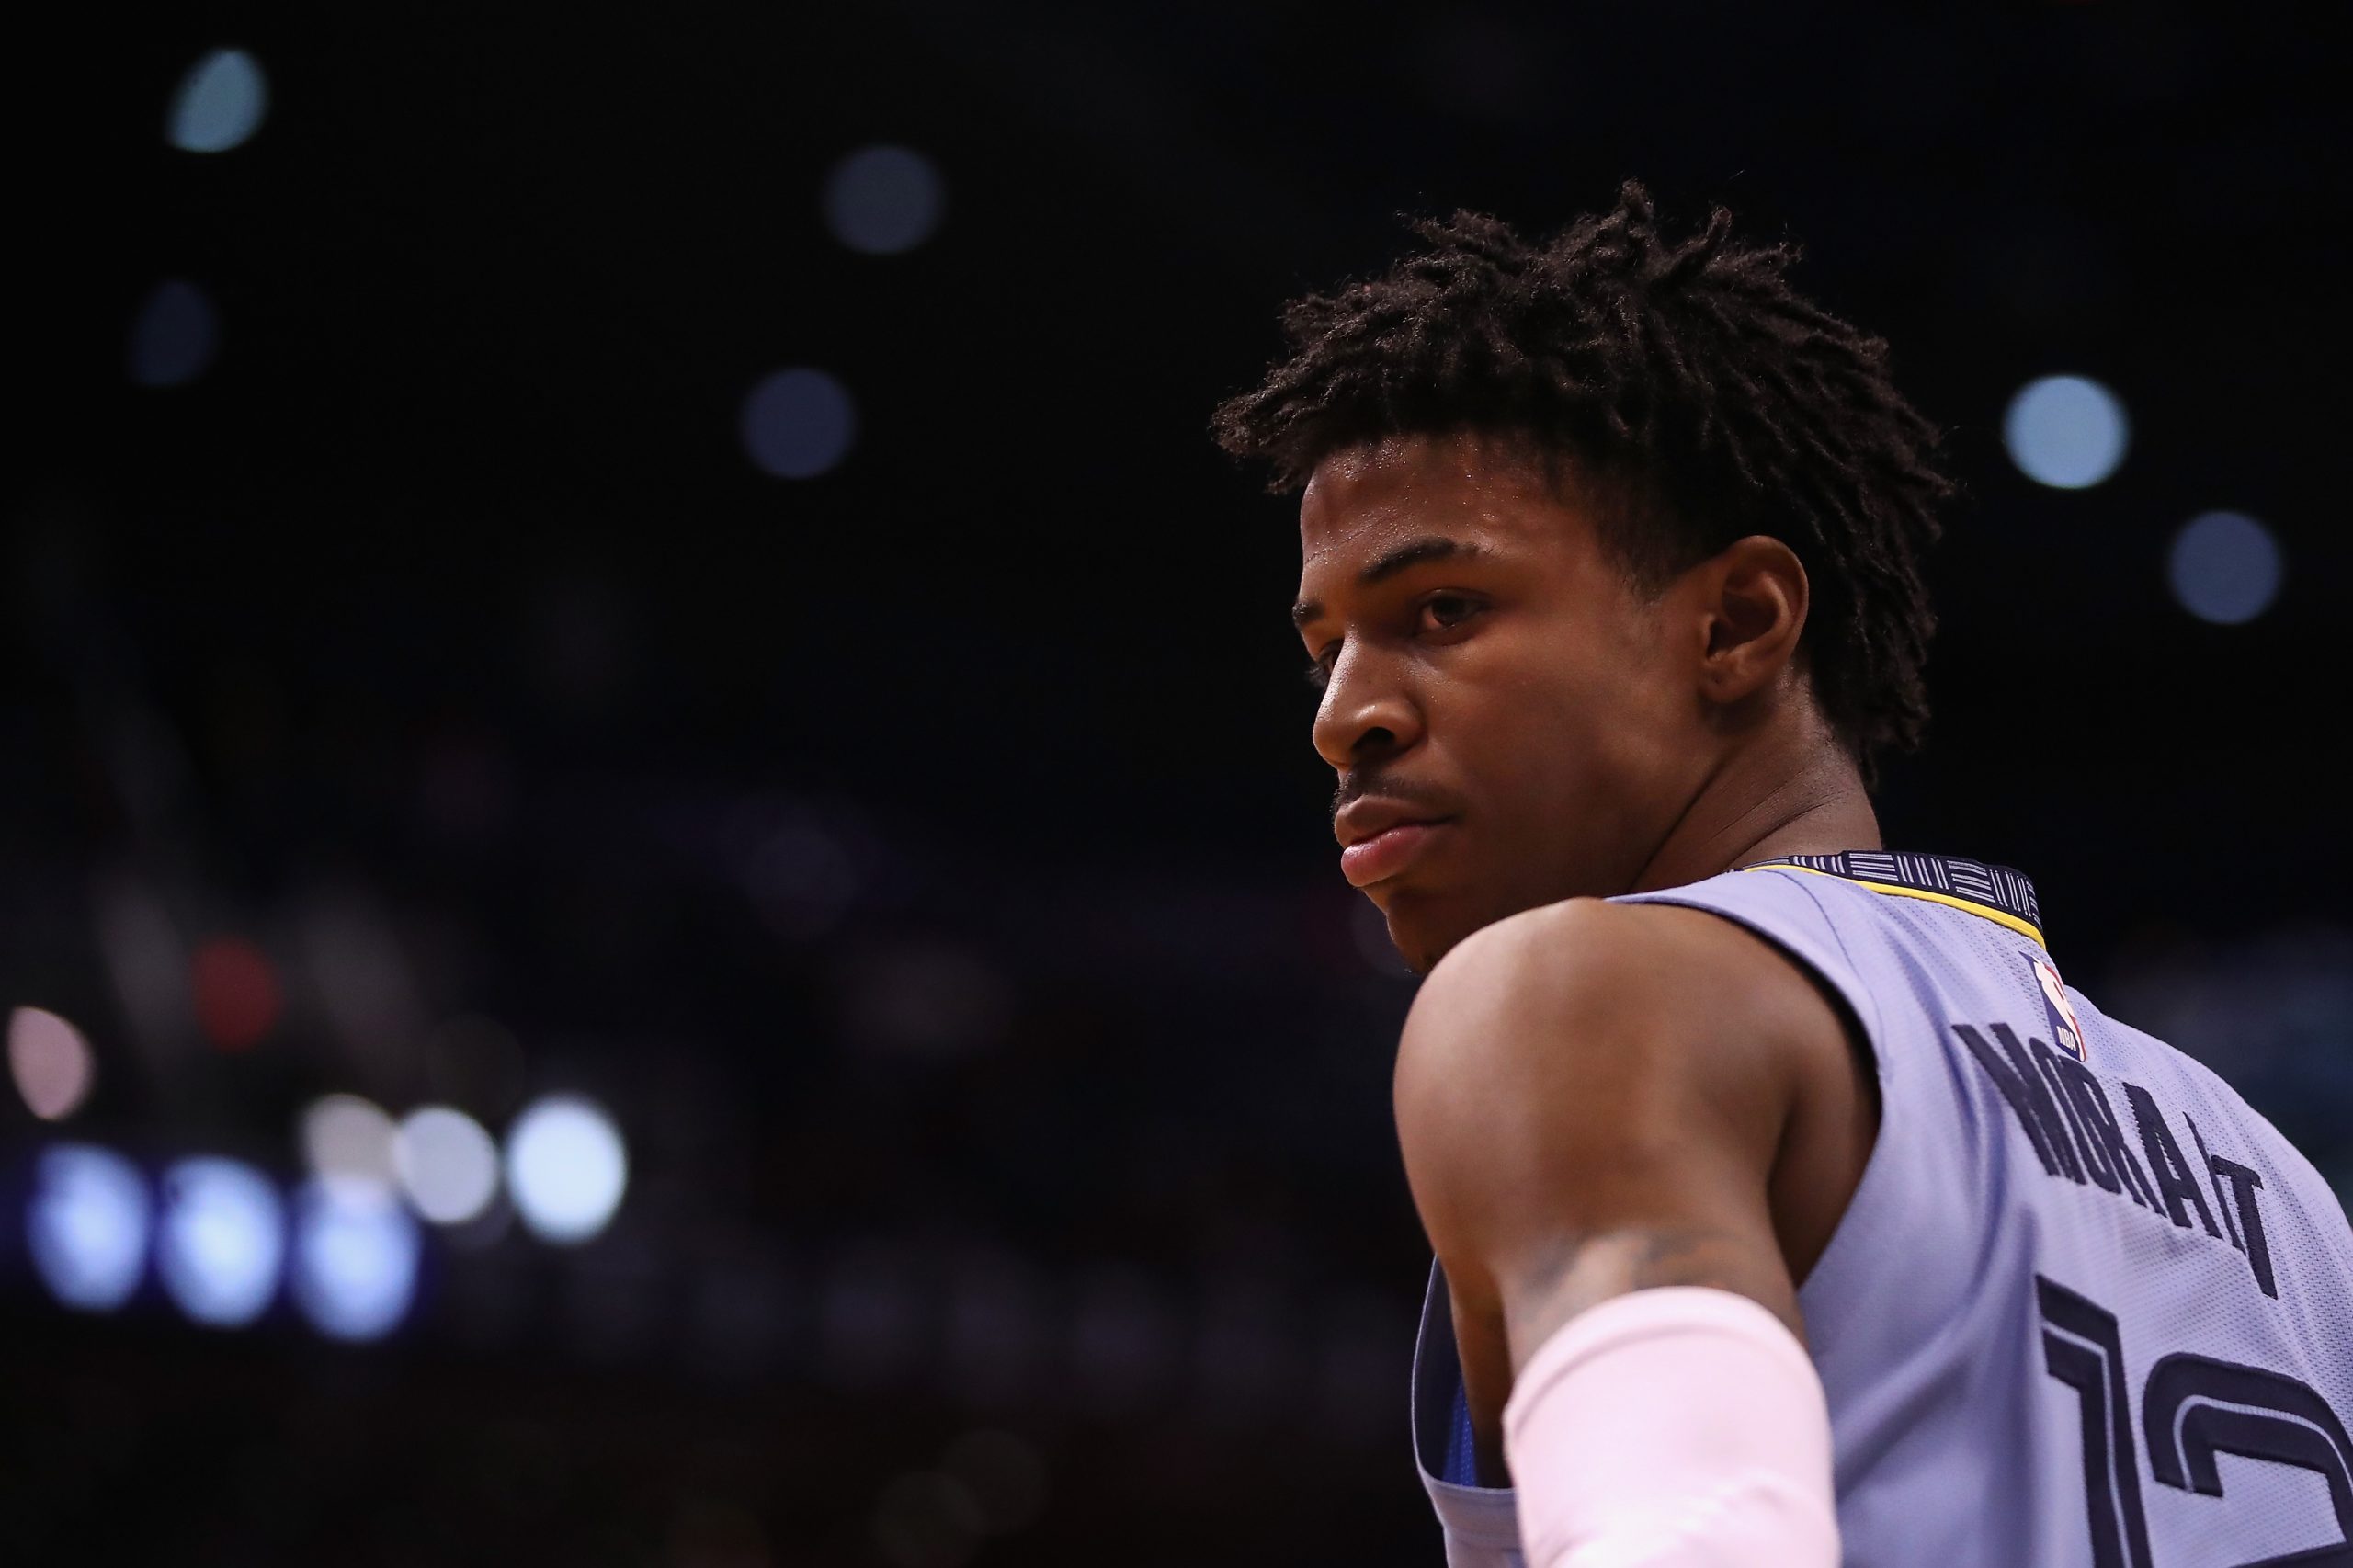 Updated NBA Rookie of the Year Odds: Ja Morant a Near Lock to Win